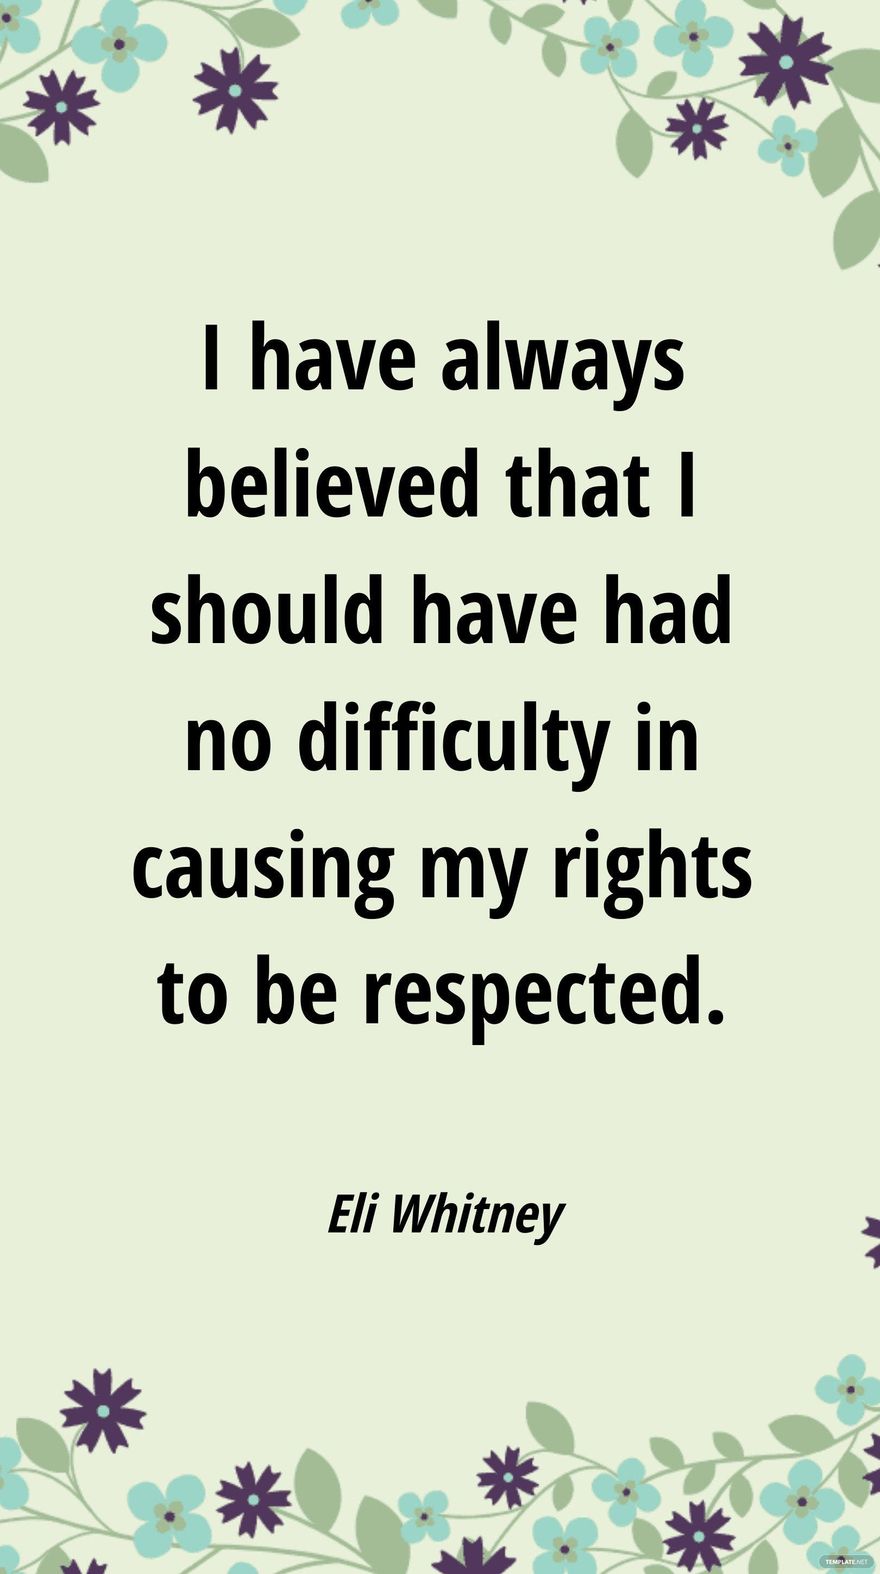 Eli Whitney - I have always believed that I should have had no difficulty in causing my rights to be respected.